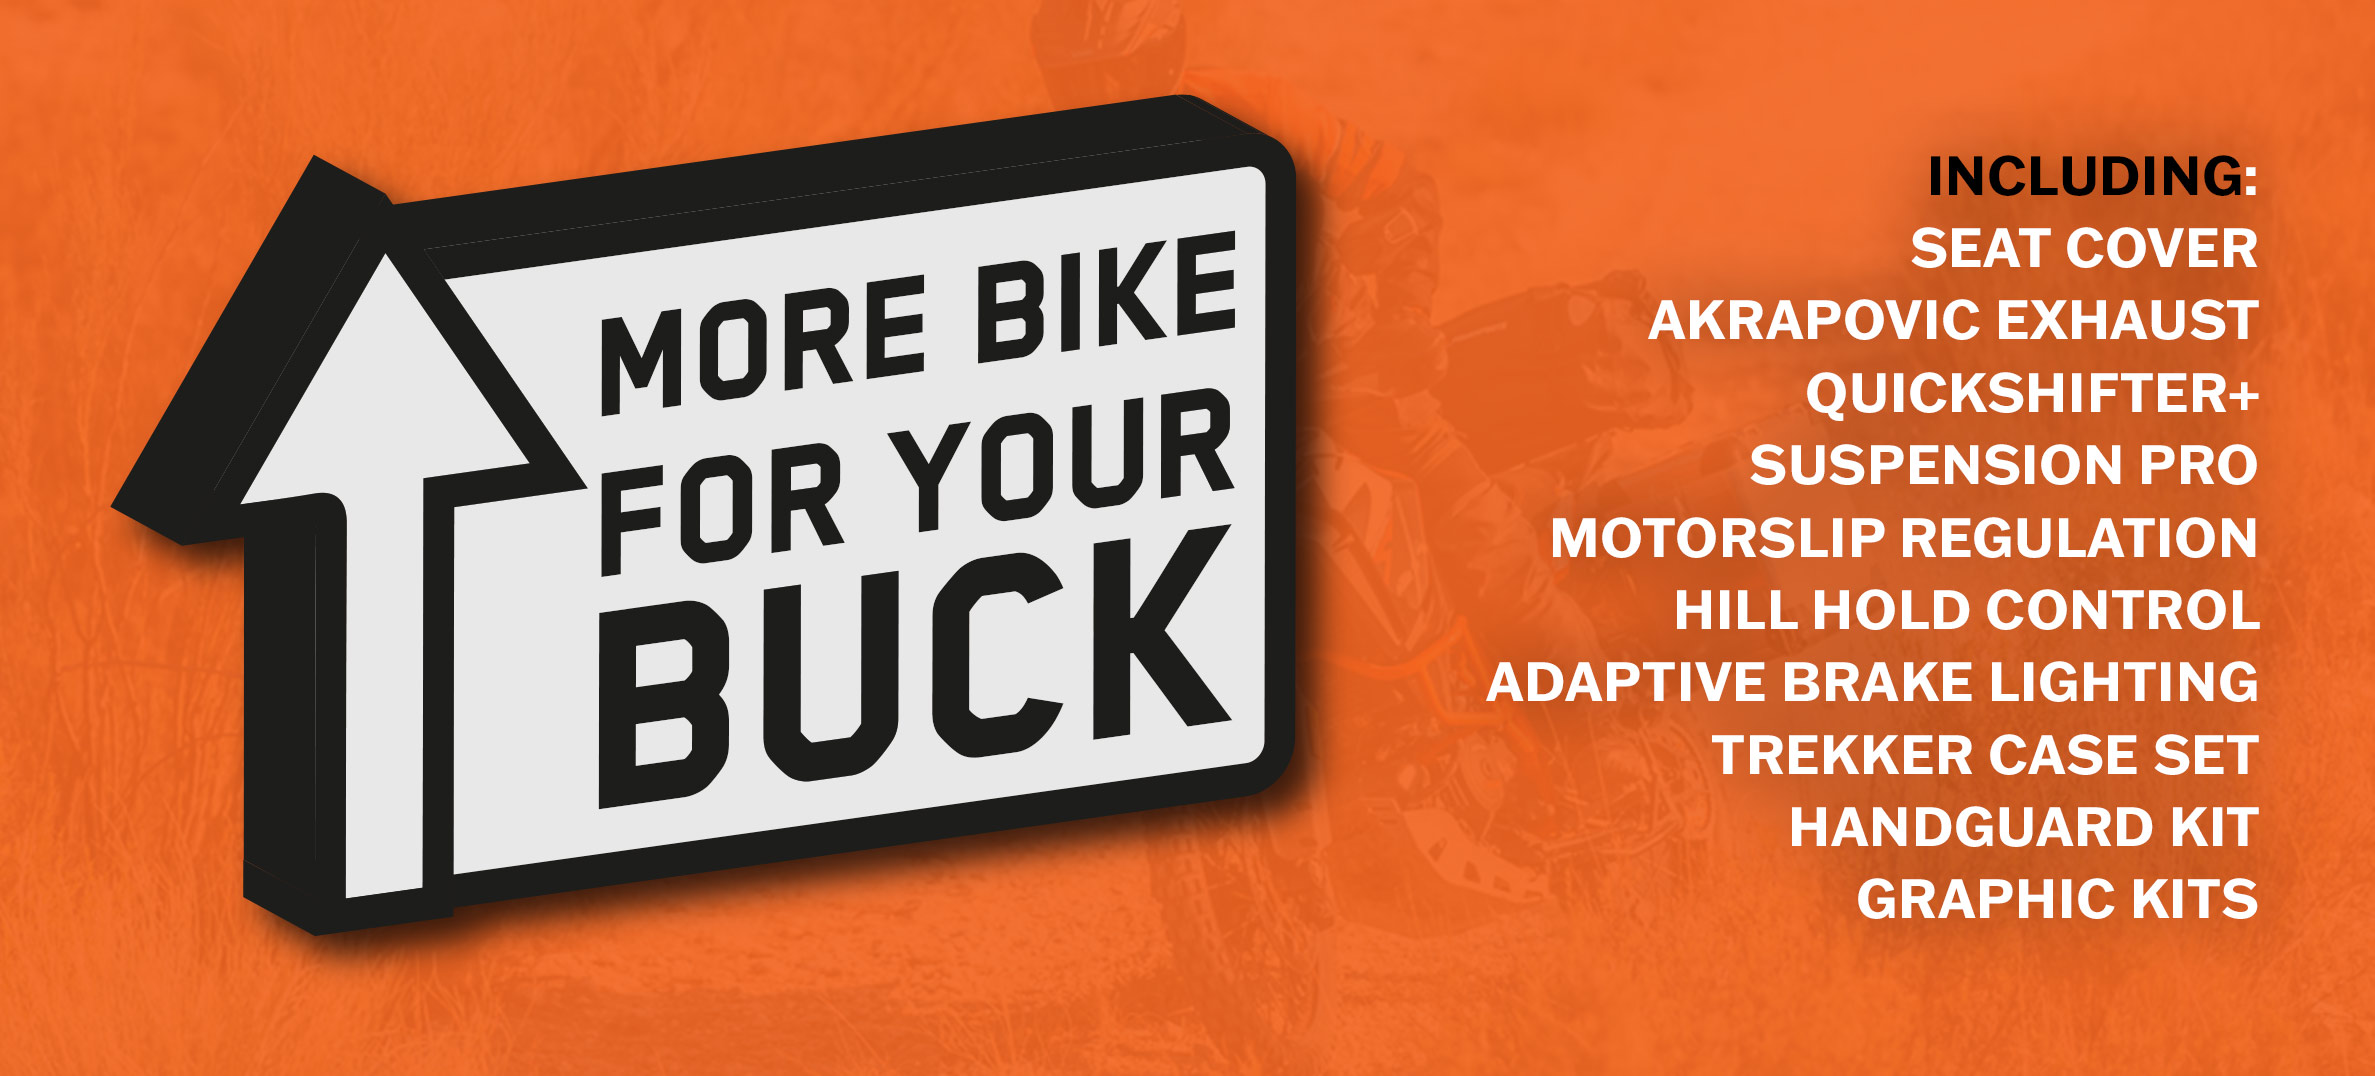 KTM More Bike for your buck!